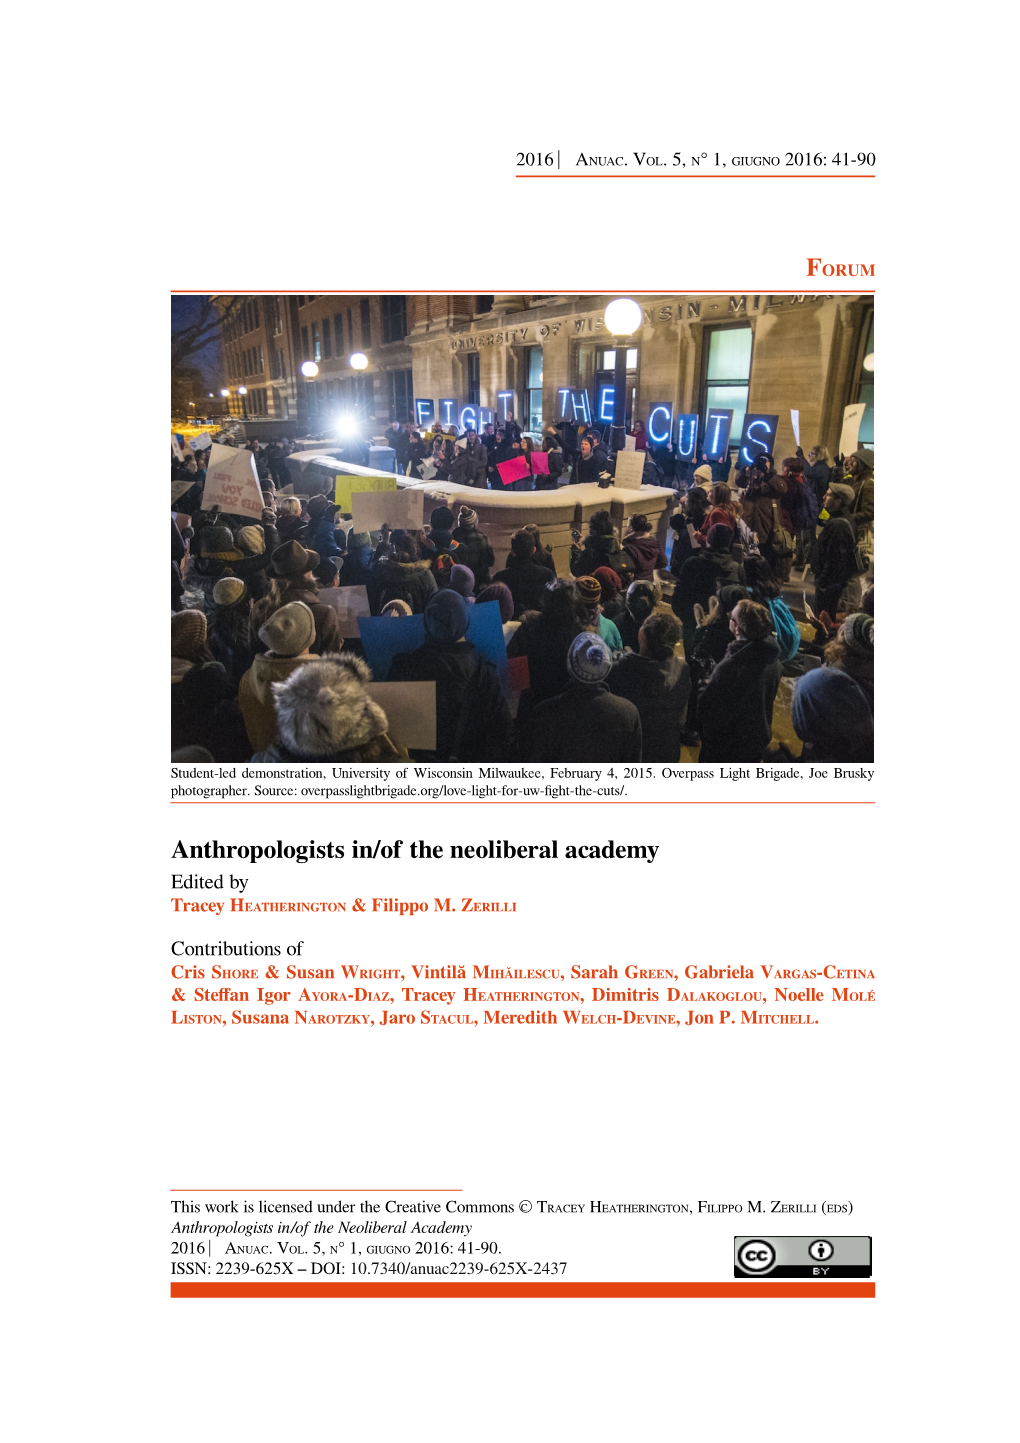 Anthropologists In/Of the Neoliberal Academy Edited by Tracey HEATHERINGTON & Filippo M